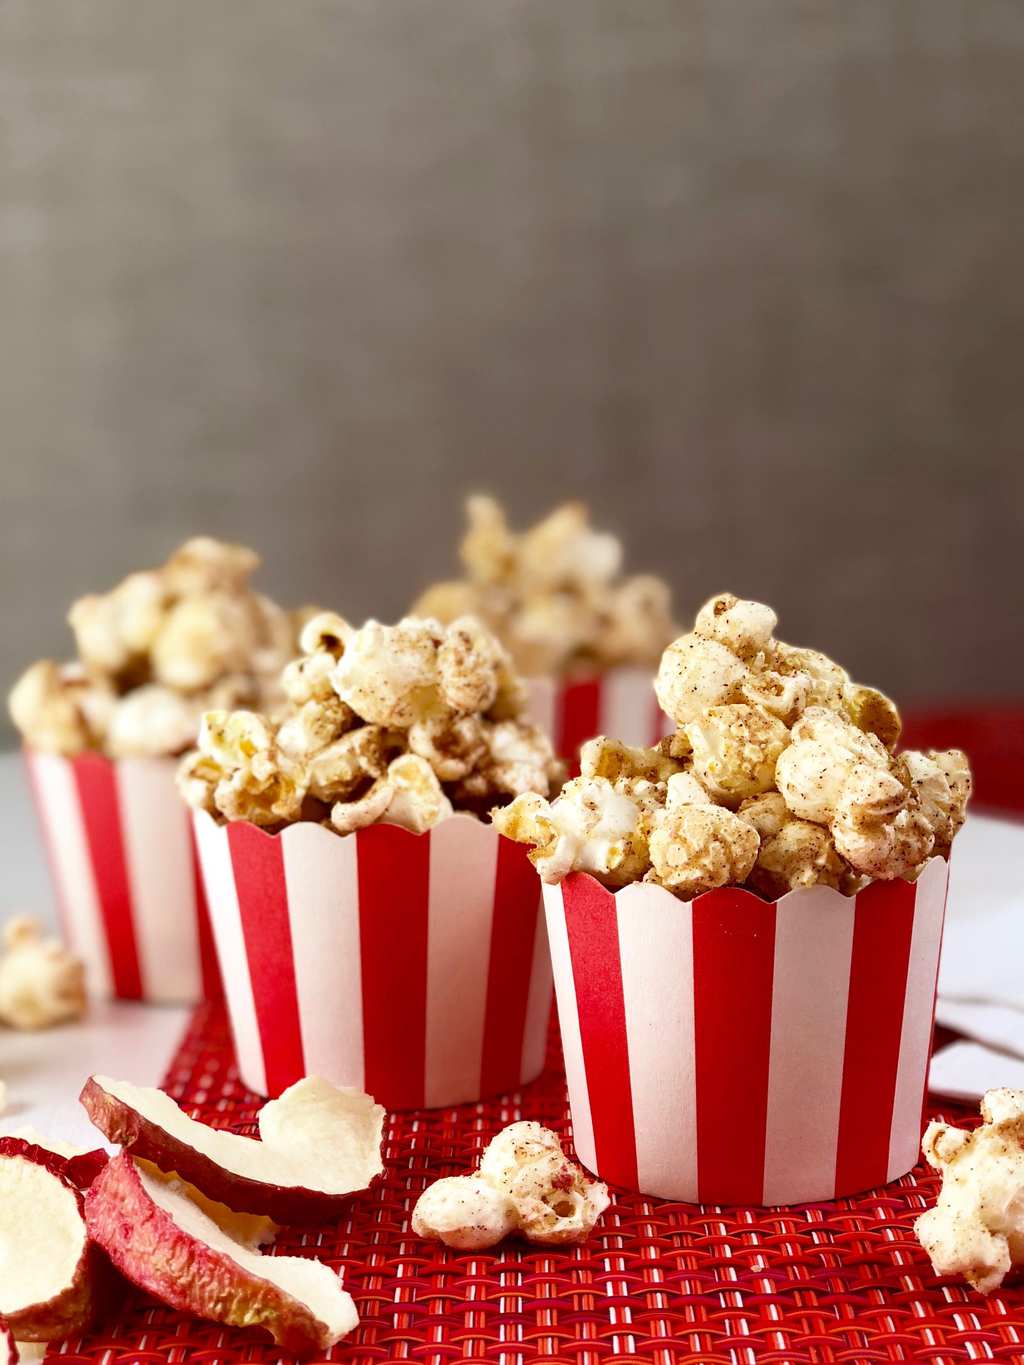 Apple cinnamon popcorn in red and white cups